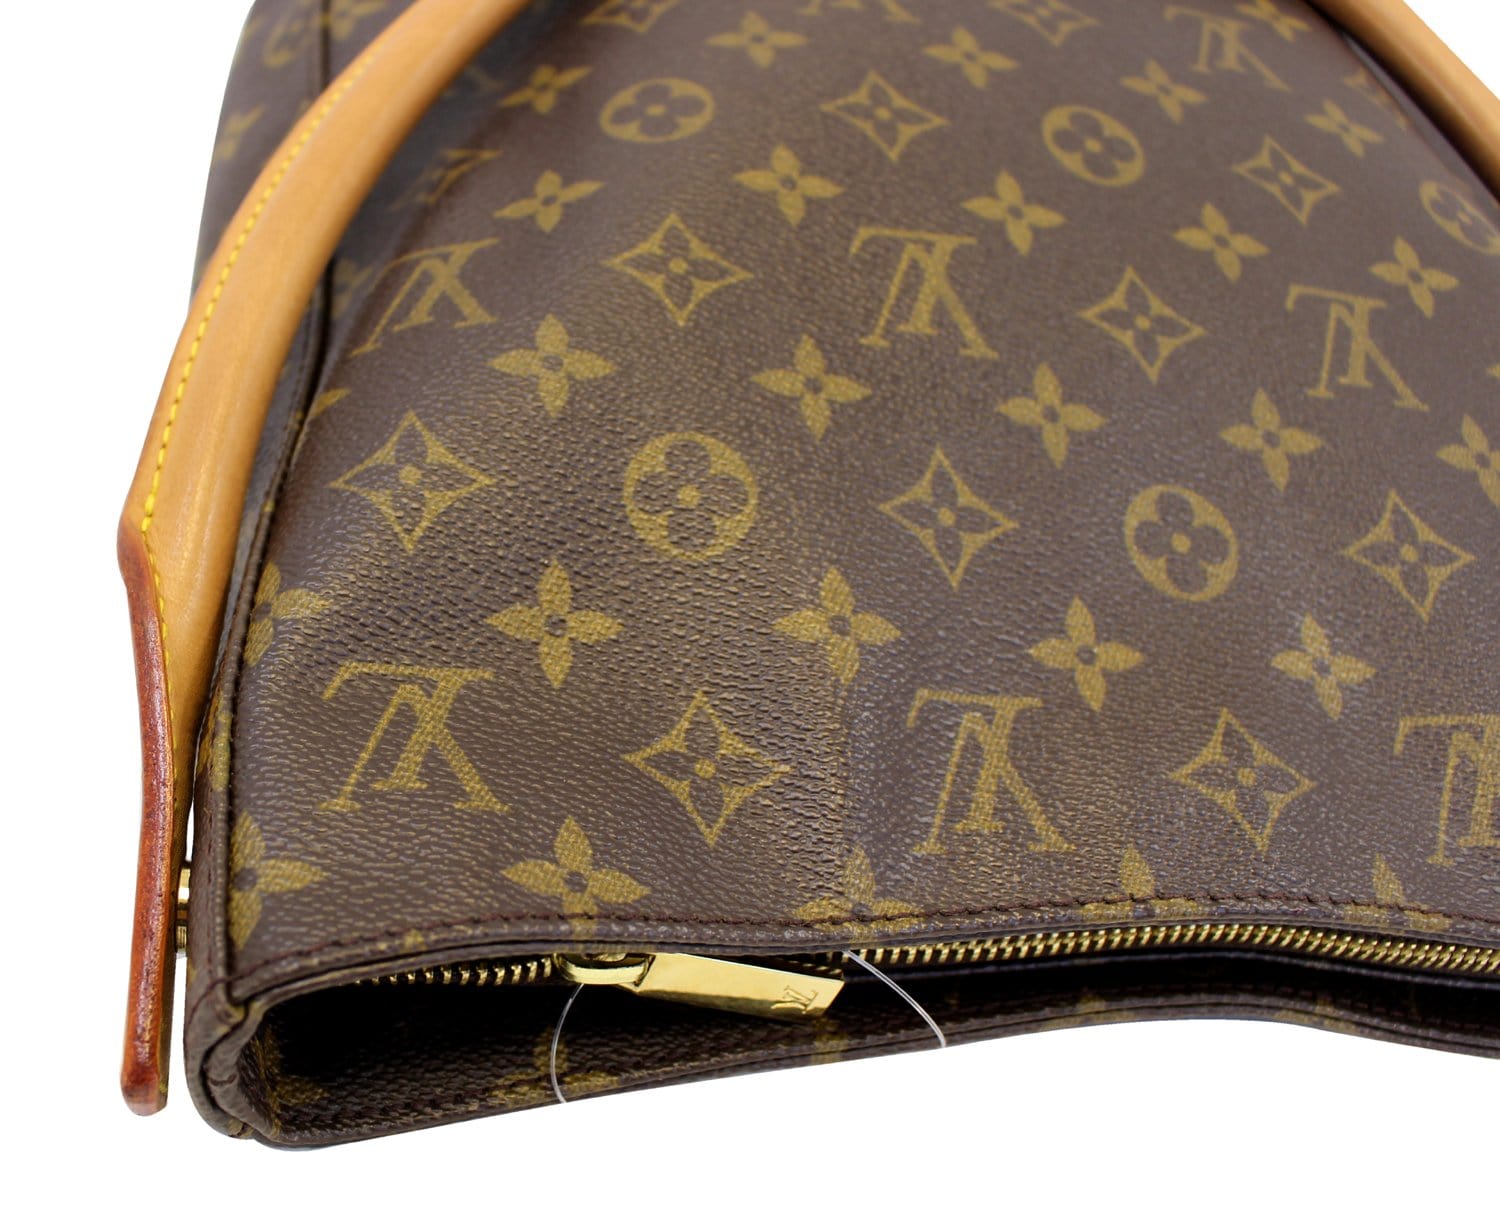 Louis Vuitton Looping Gm Brown Gold Plated Shoulder Bag (Pre-Owned) –  Bluefly